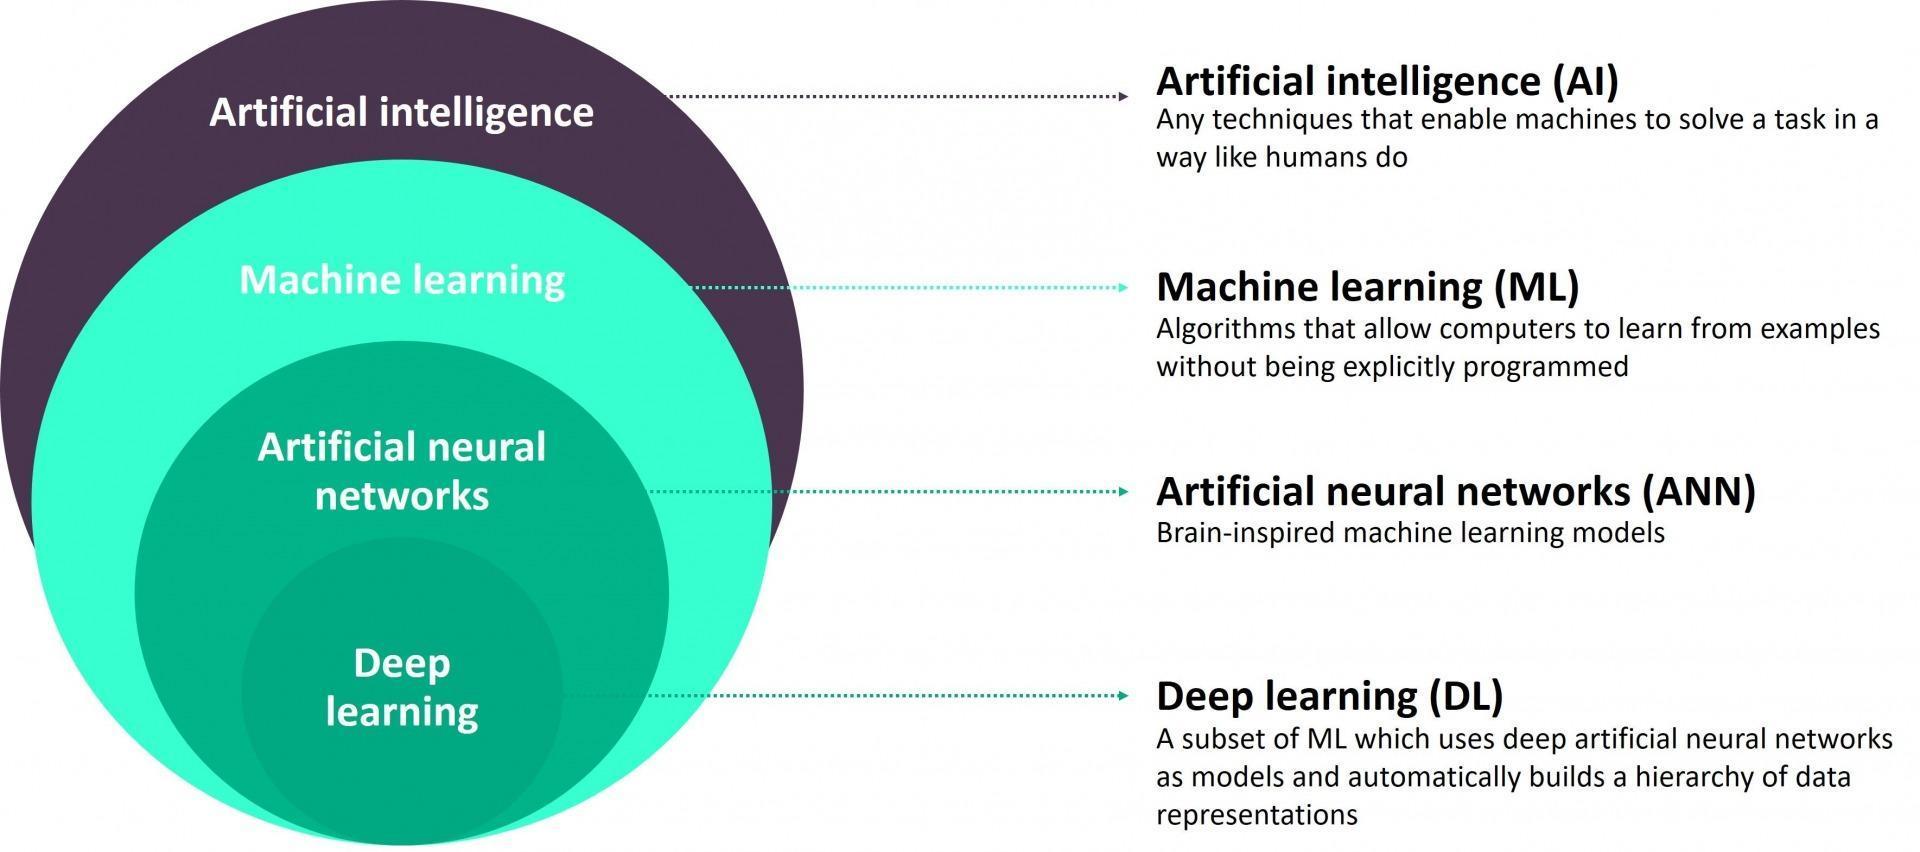 machine learning and artificial intelligence - title